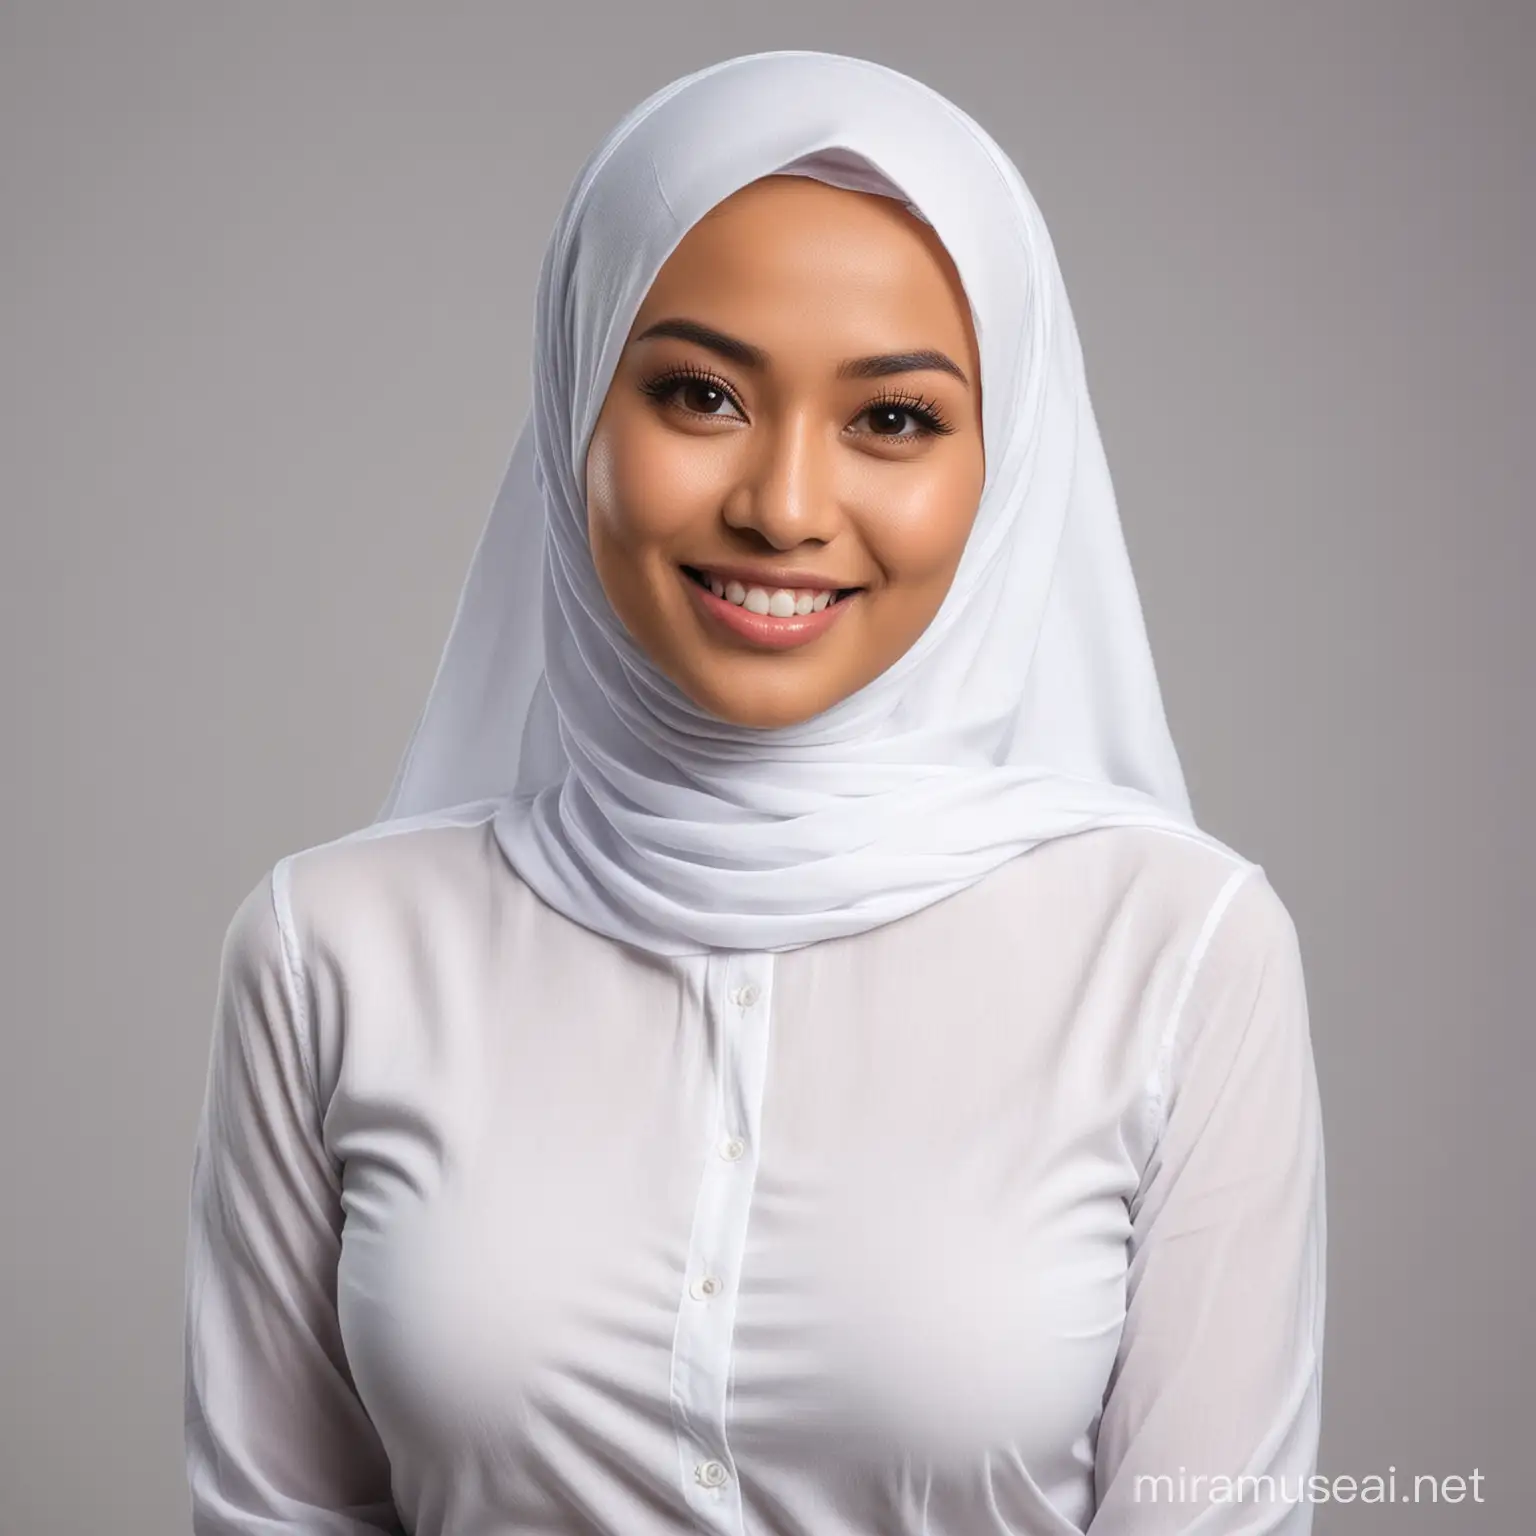 Malaysian Malay lady, typical village Malaysian face. Wearing a long-sleeved white shirt and hijab, sexy posing while show off her big boobs for a photoshoot with a clean background, looking directly at the camera with smiling face expression. She has a nice and sexy body shape. 